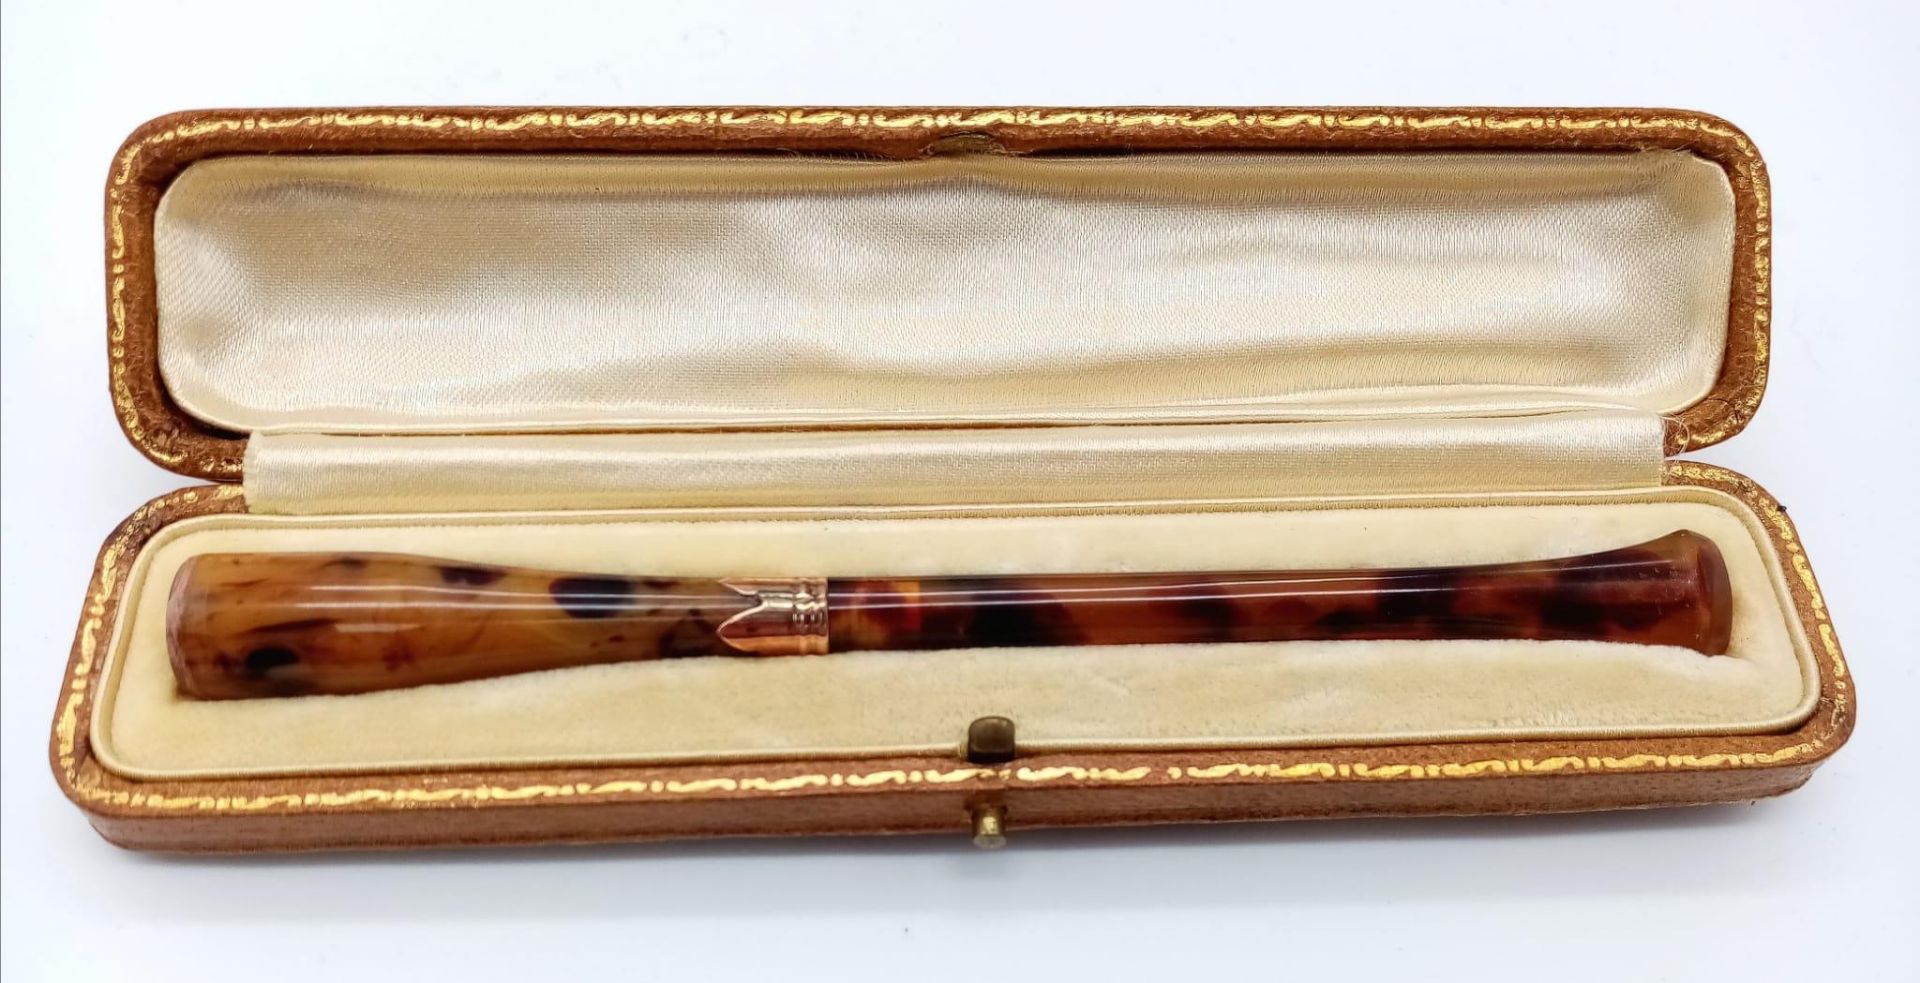 An Antique Bakelite Faux Tortoiseshell Cigar/Cheroot Holder with 9K Gold mid-rim. Comes with a